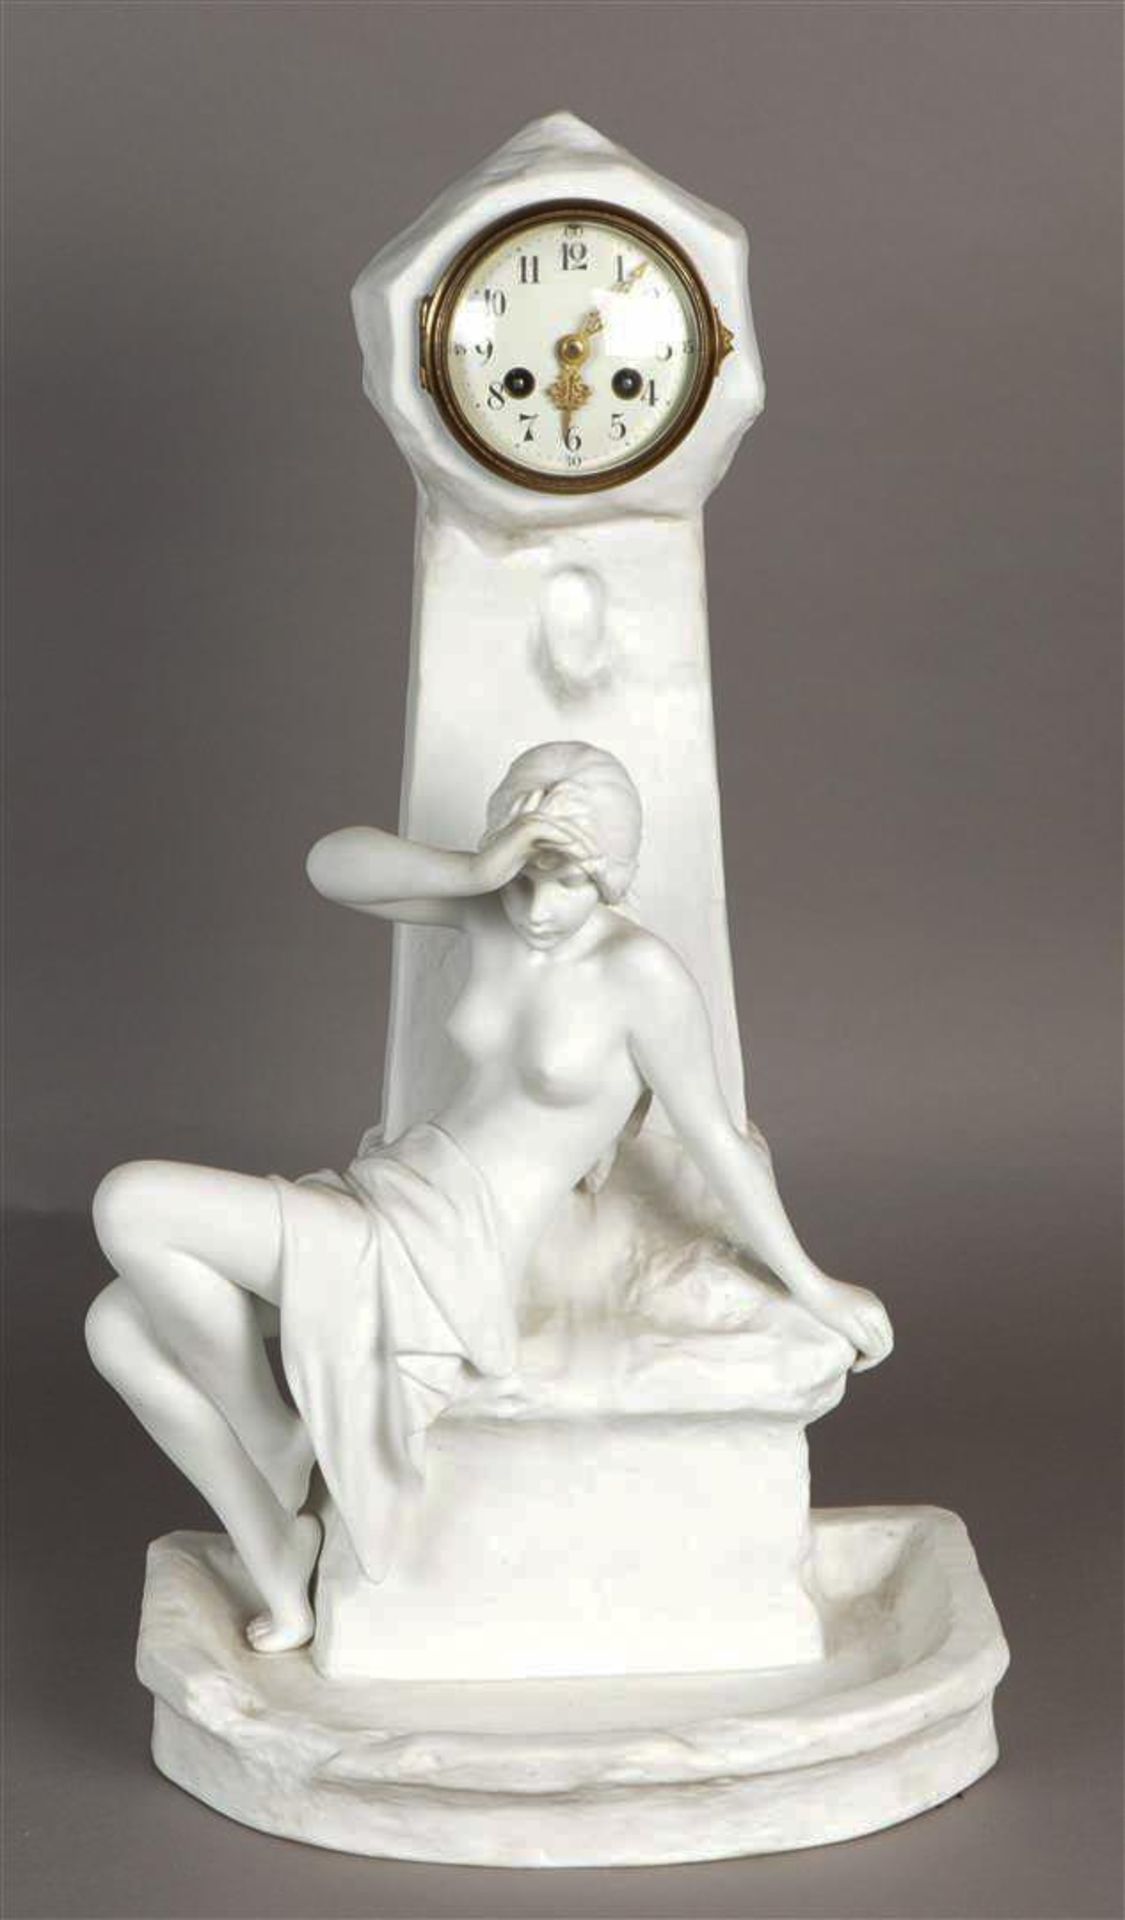 A biscuit Art Nouveau mantel clock, ca. 1900. (Not tested for long-term operation). - Image 2 of 11